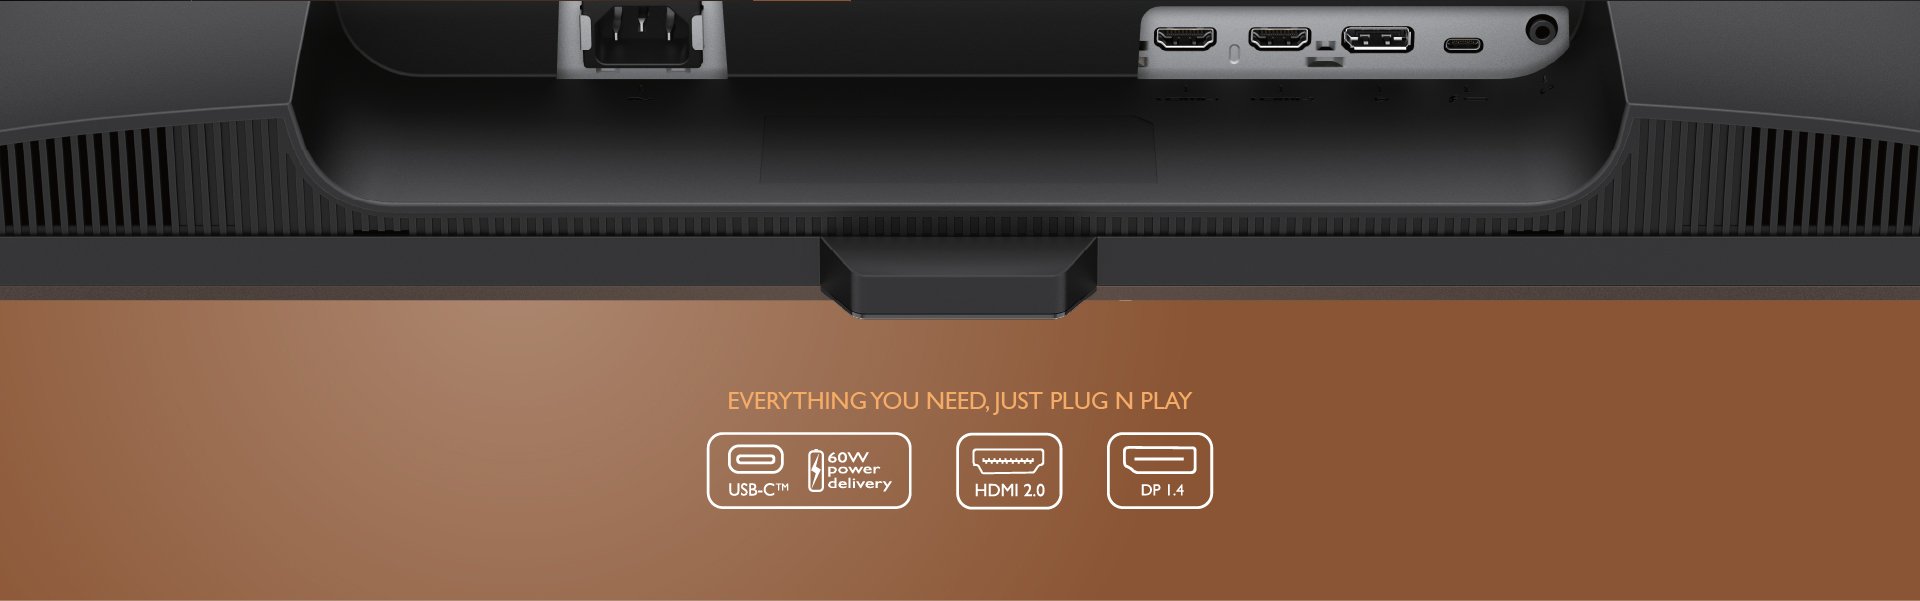 Everything you need, just plug n play